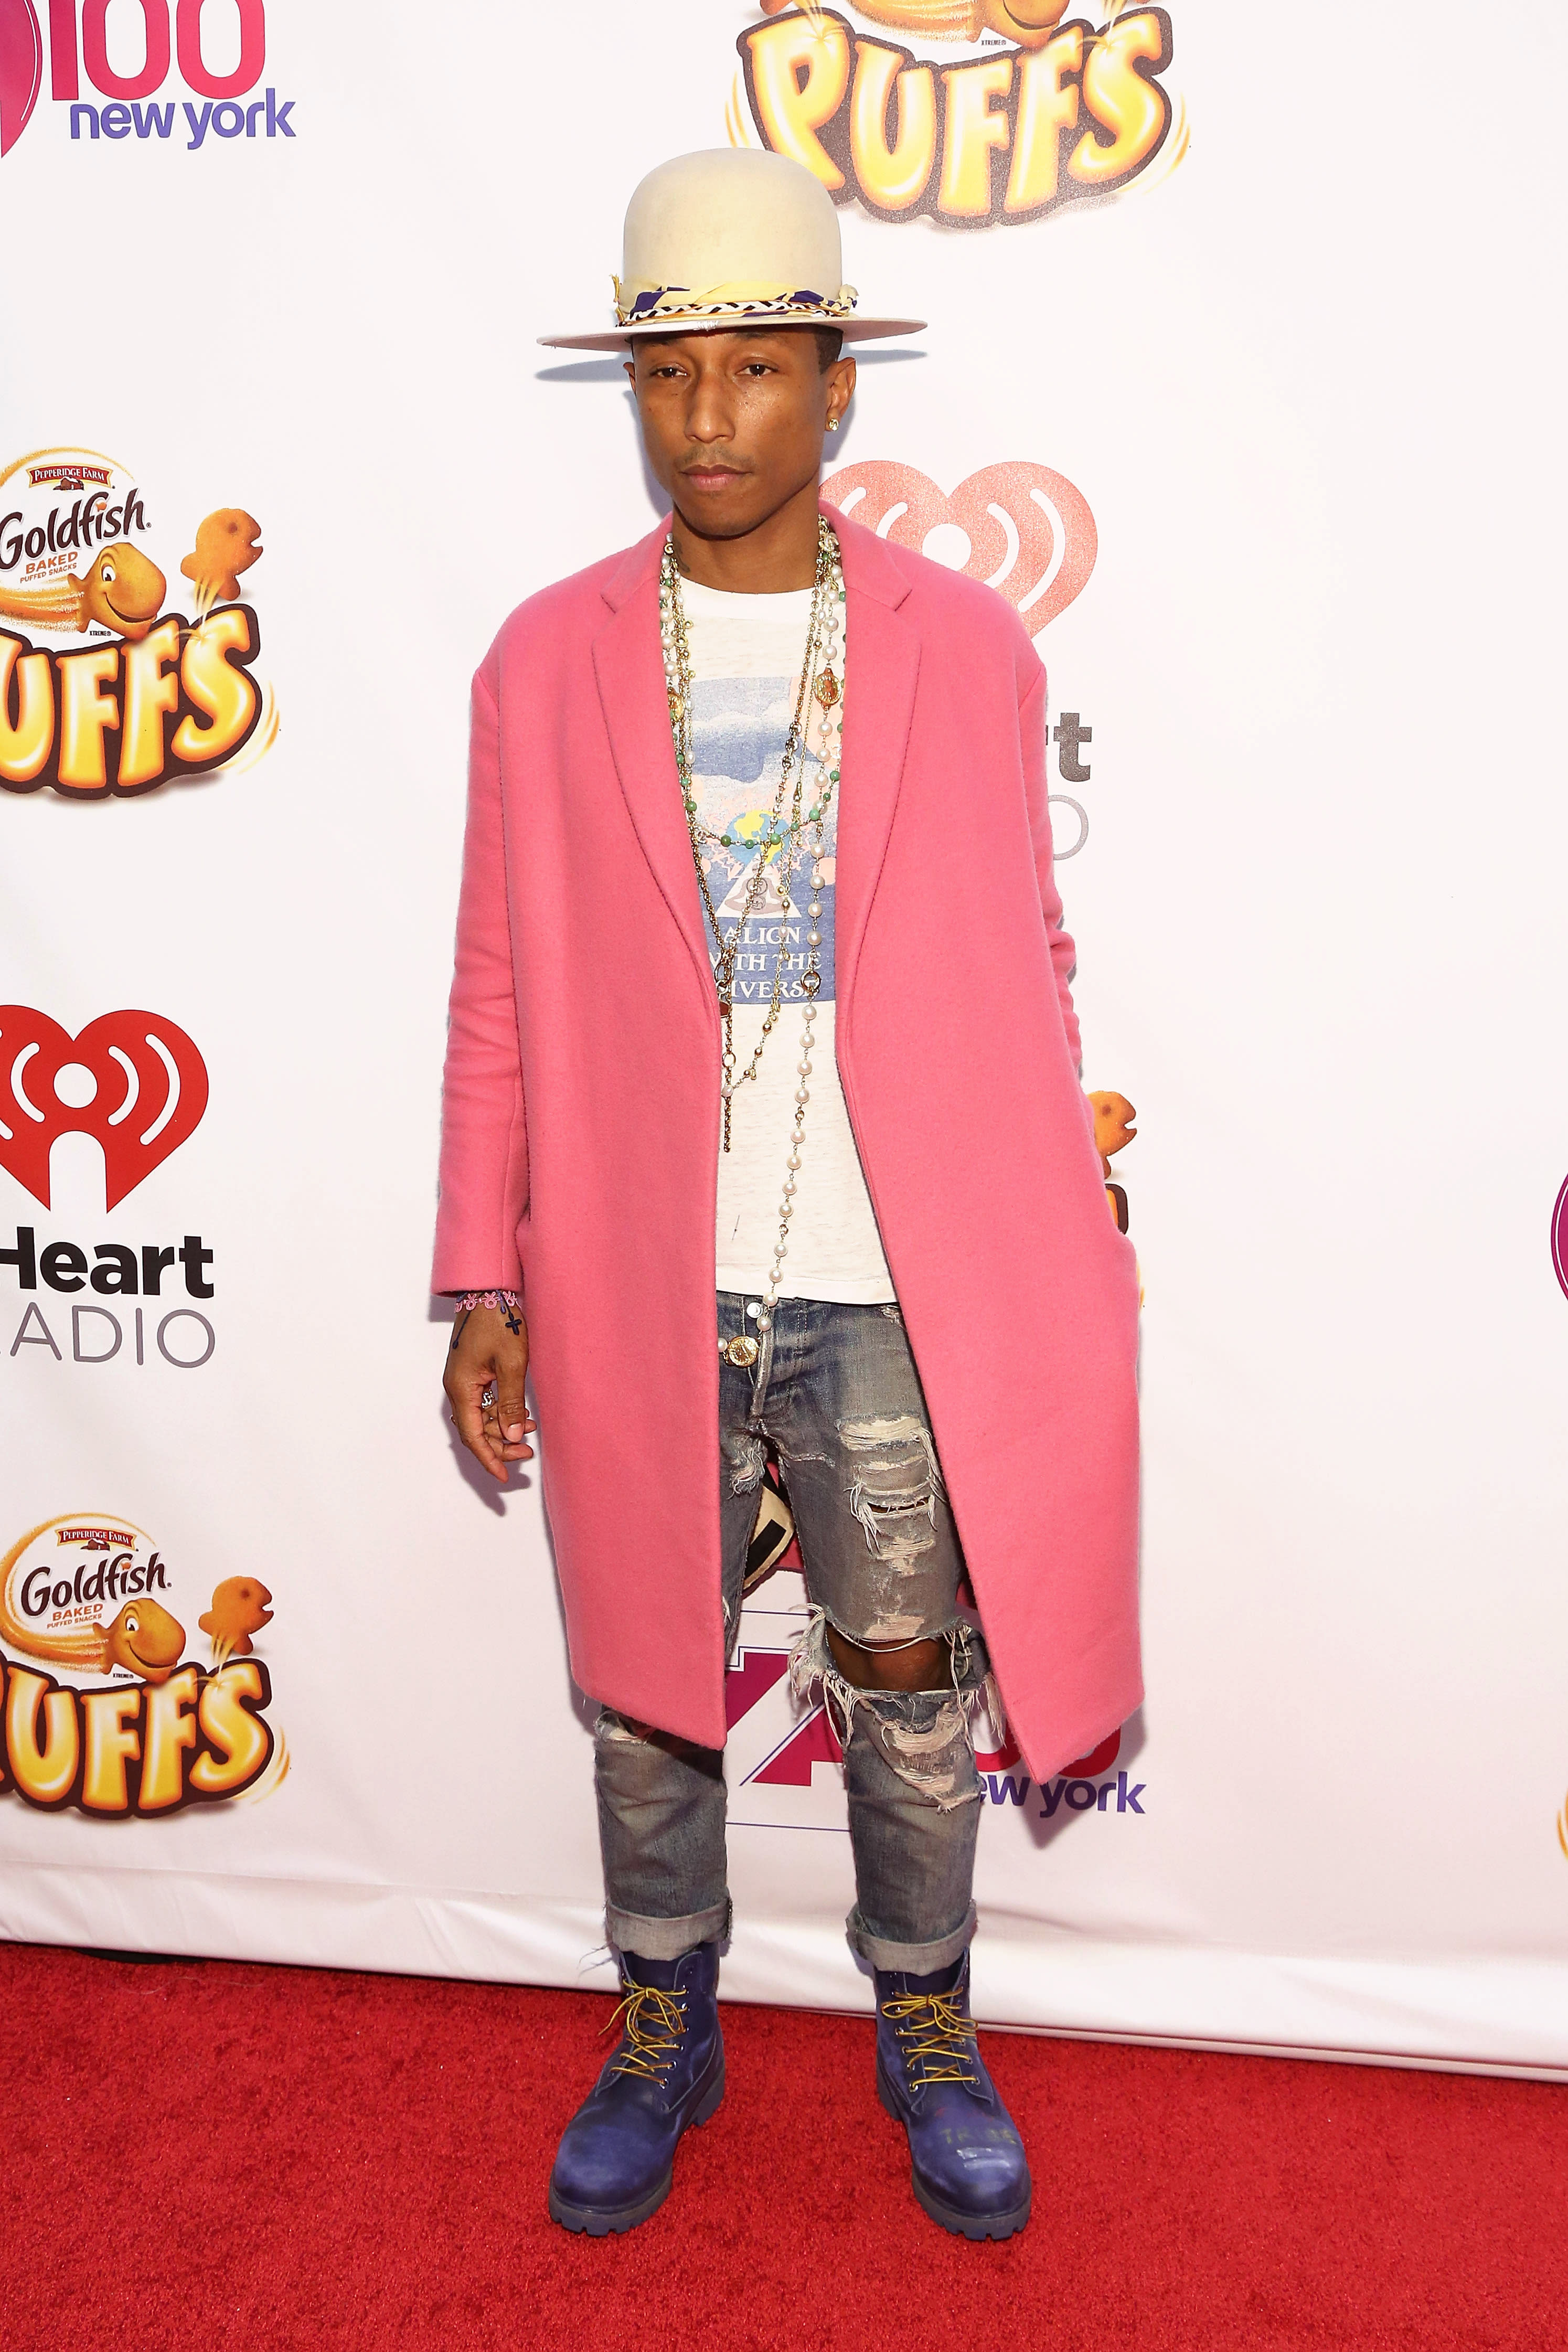 Best Pharrell Outfits